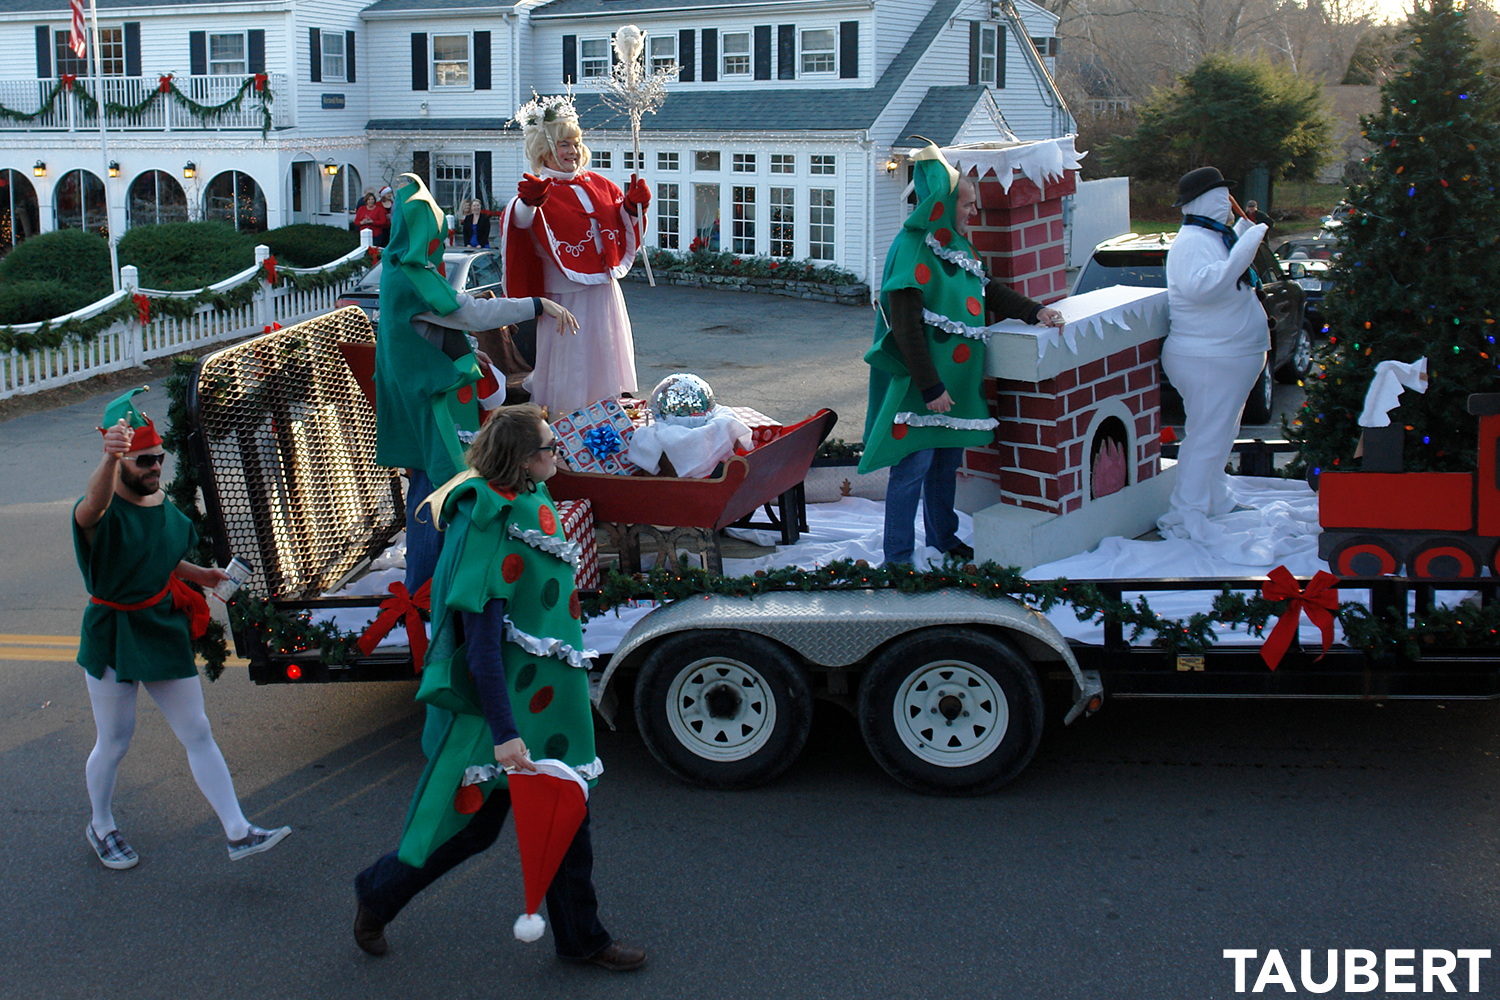 36th Annual Christmas by the Sea Celebration in Ogunquit, Maine 2022